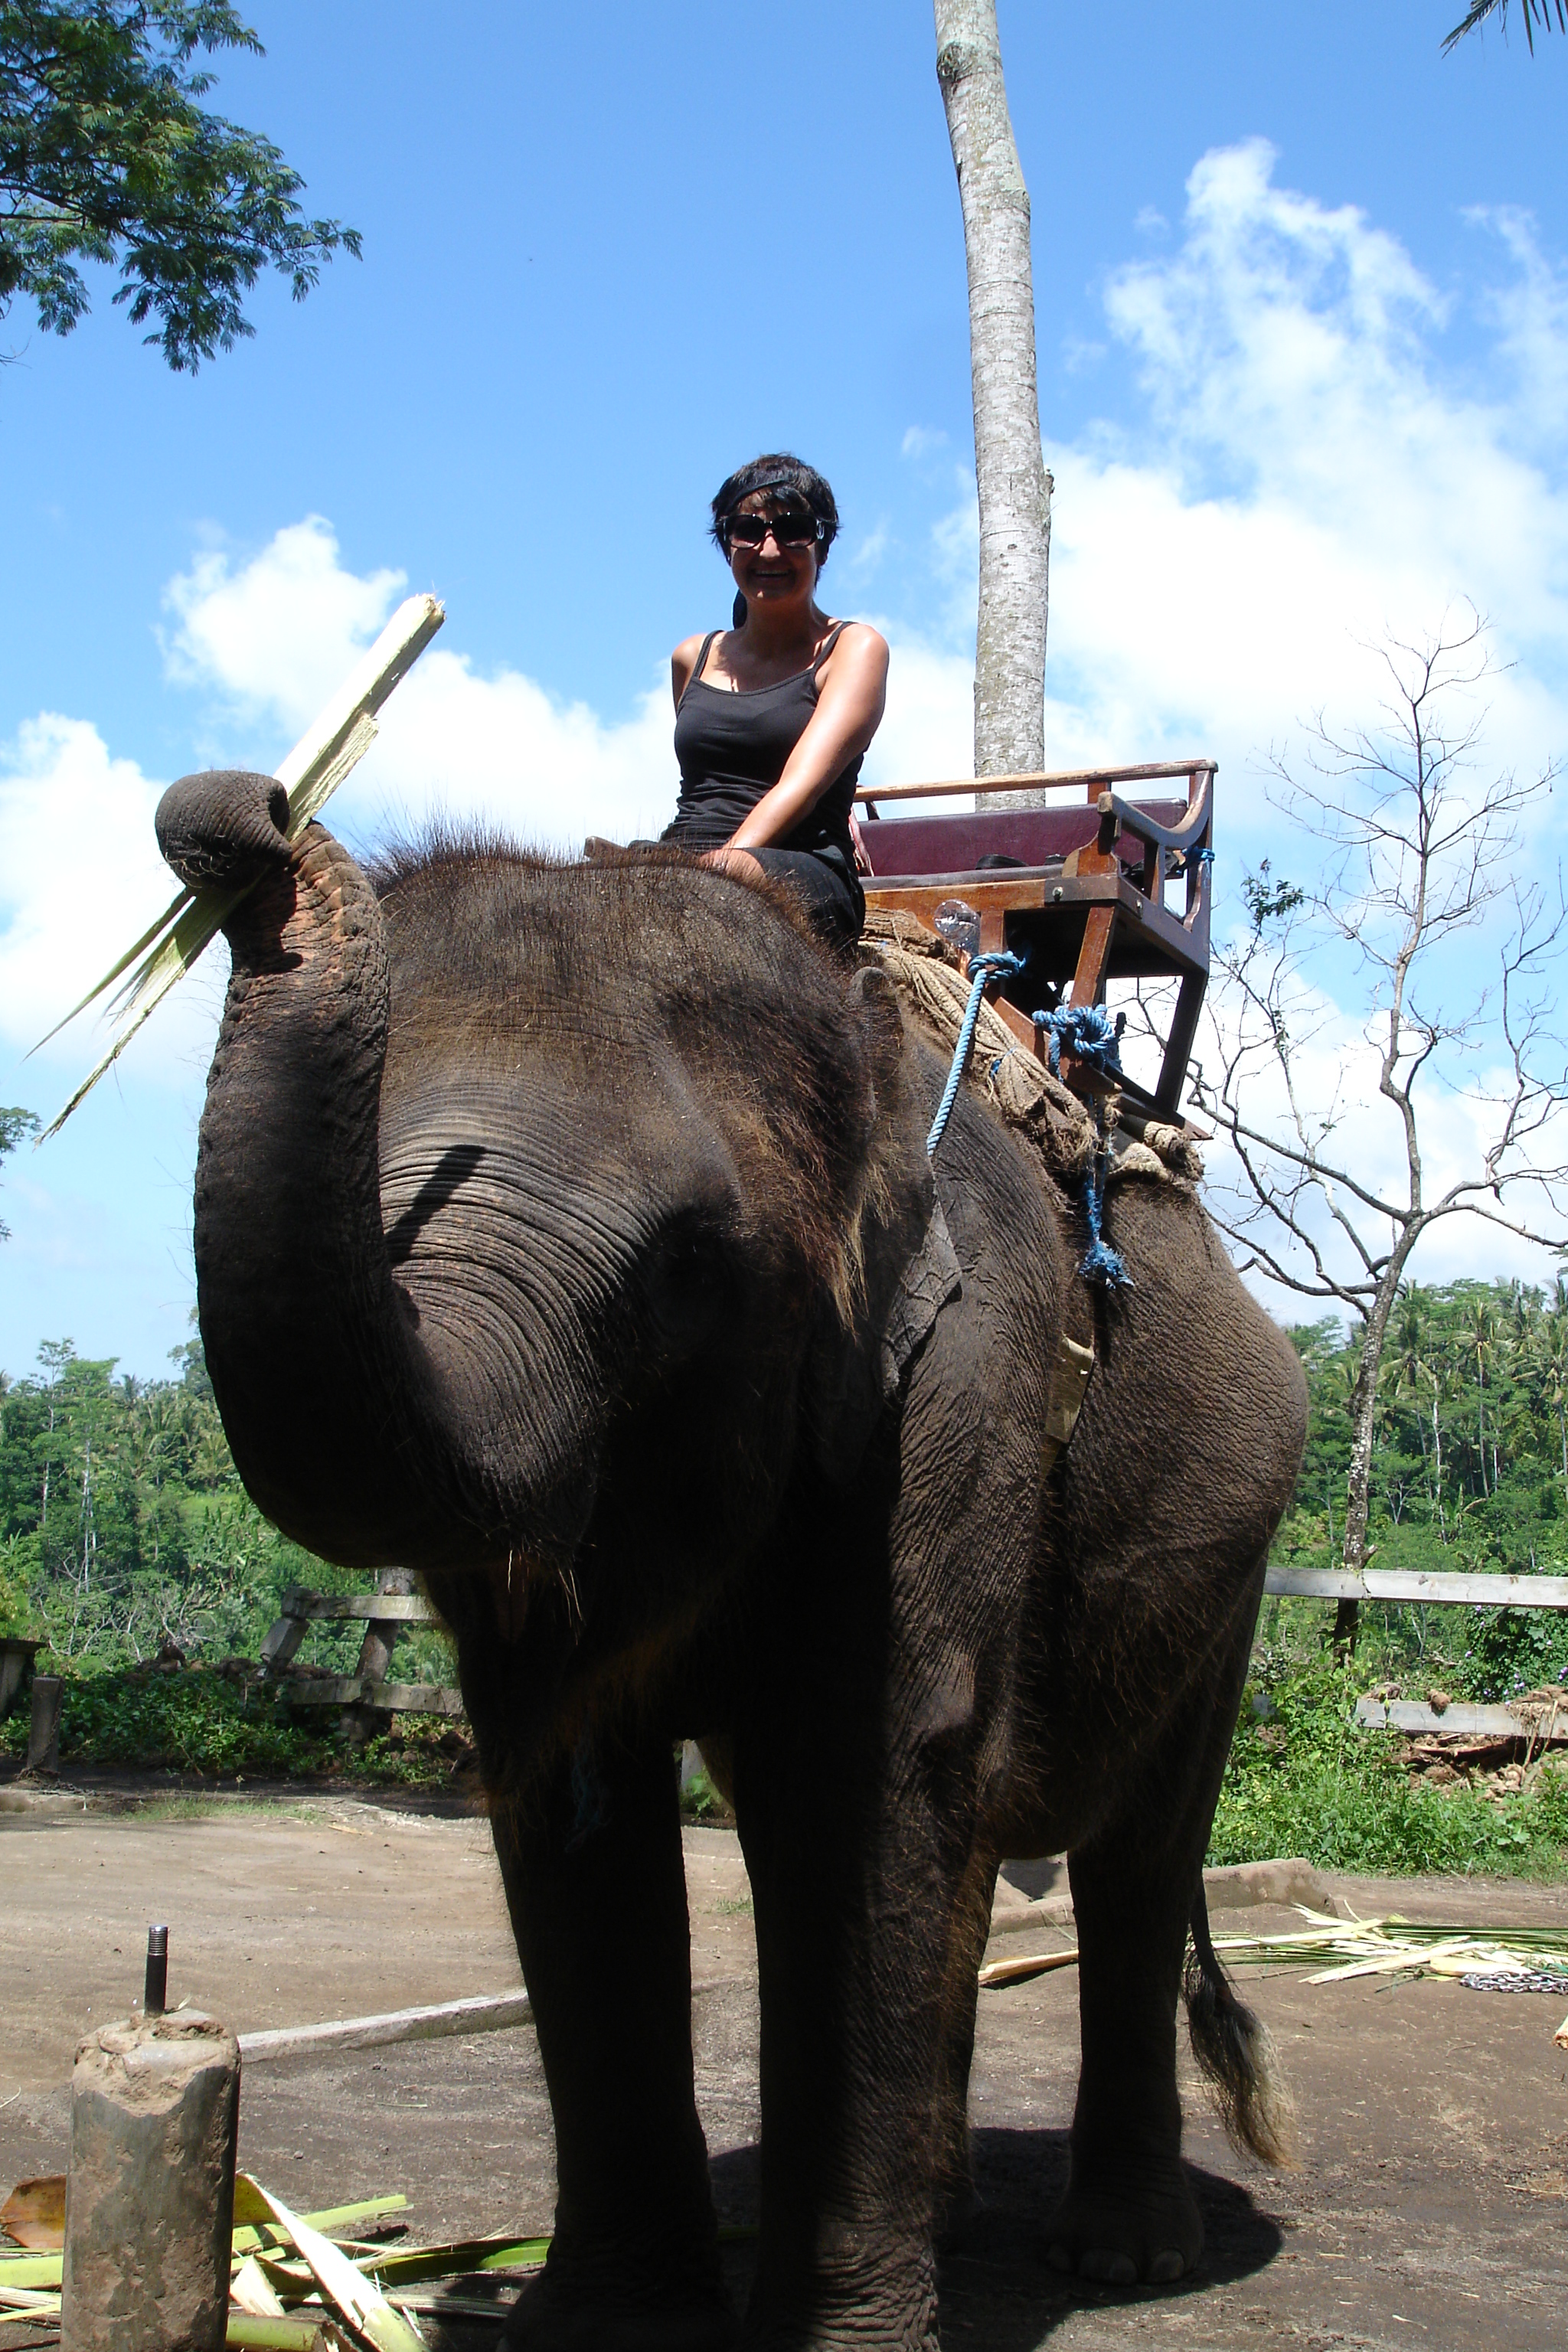 Me riding an Elephant in Bali